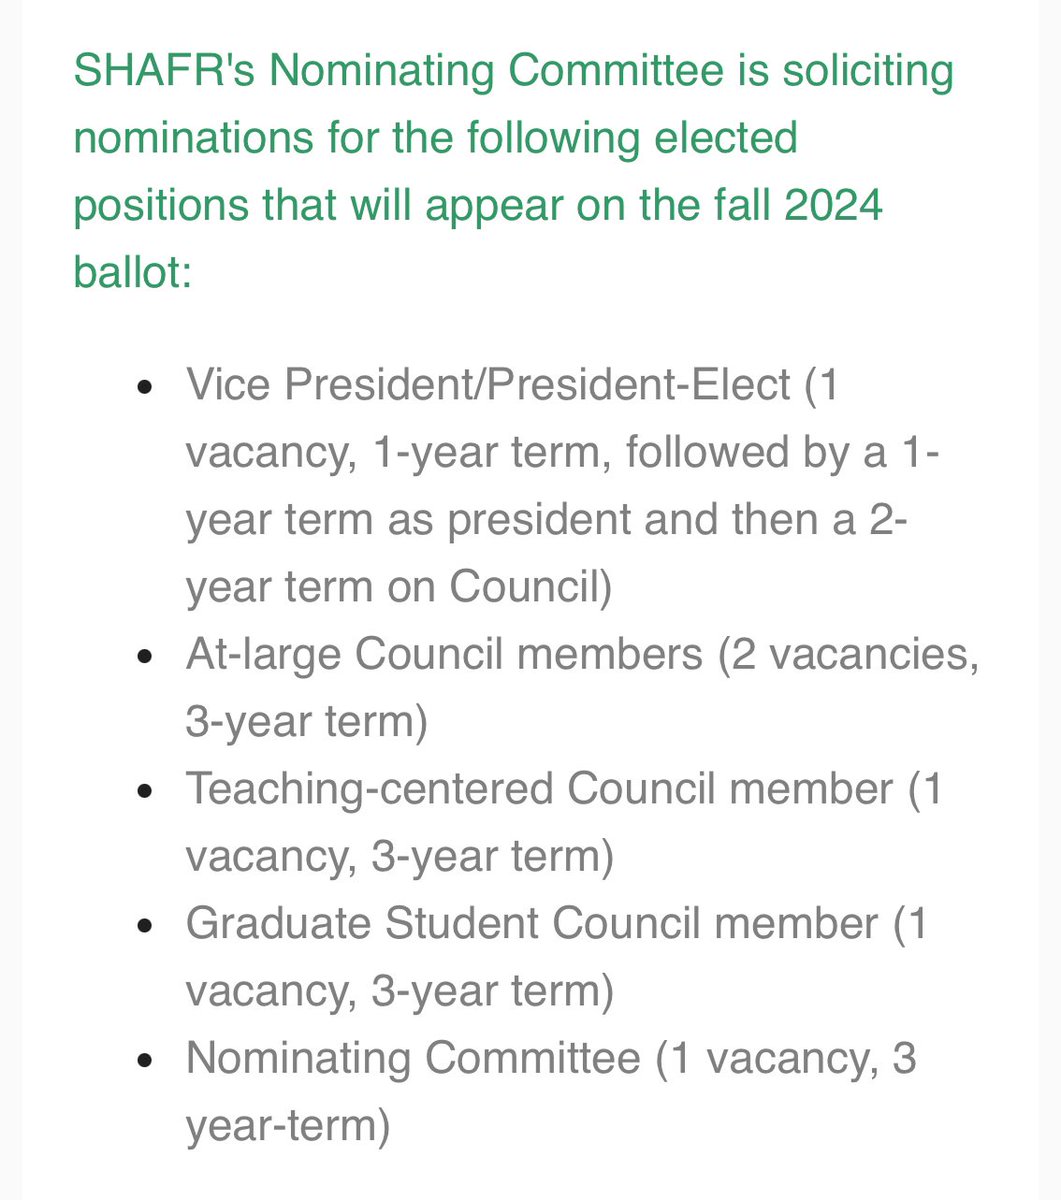 SHAFR is seeking nominations for several elected positions. Please consider nominating a colleague (or yourself). Nominations are due June 24 and should be emailed to the chair of the Nominating Committee, Julia Irwin. More info below.